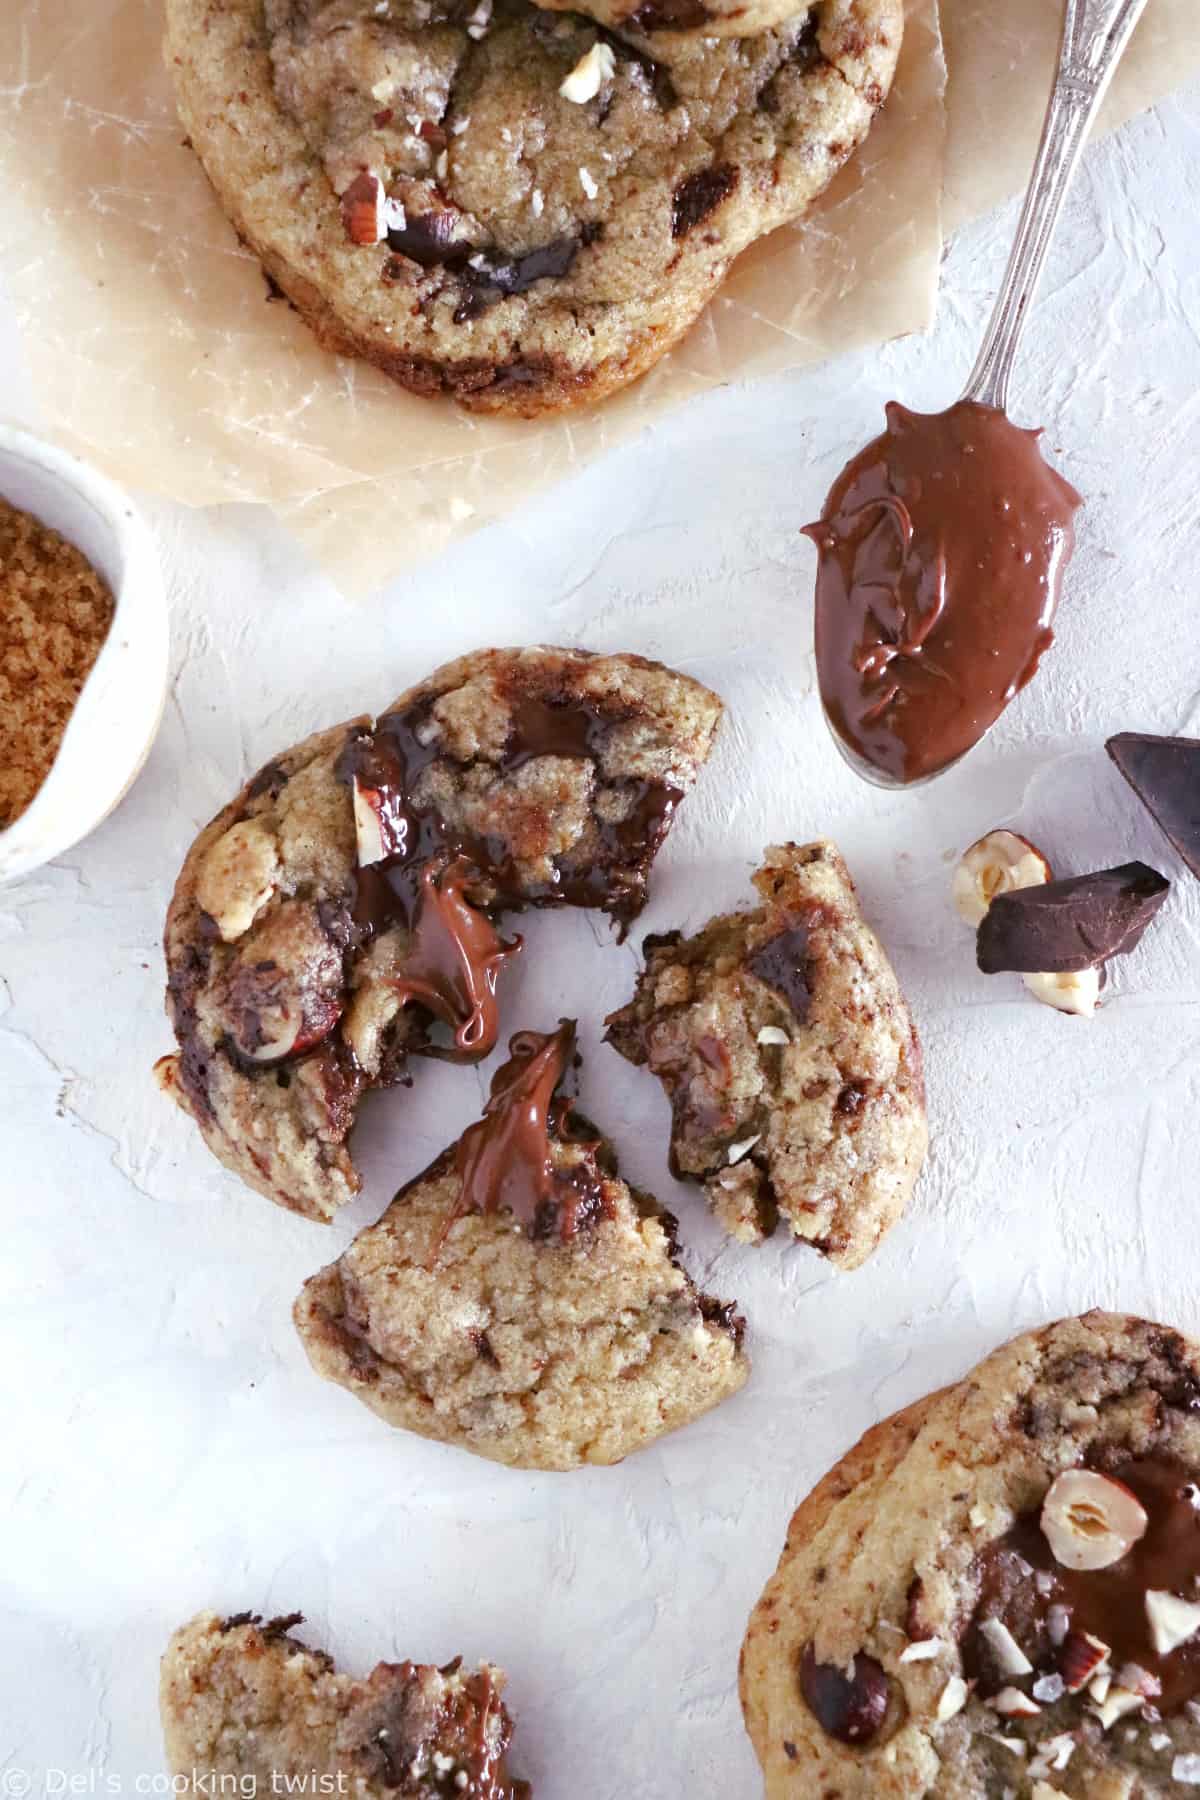 These hazelnut chocolate lava cookies are thick and soft in texture, and bursting with a molten core of chocolate.